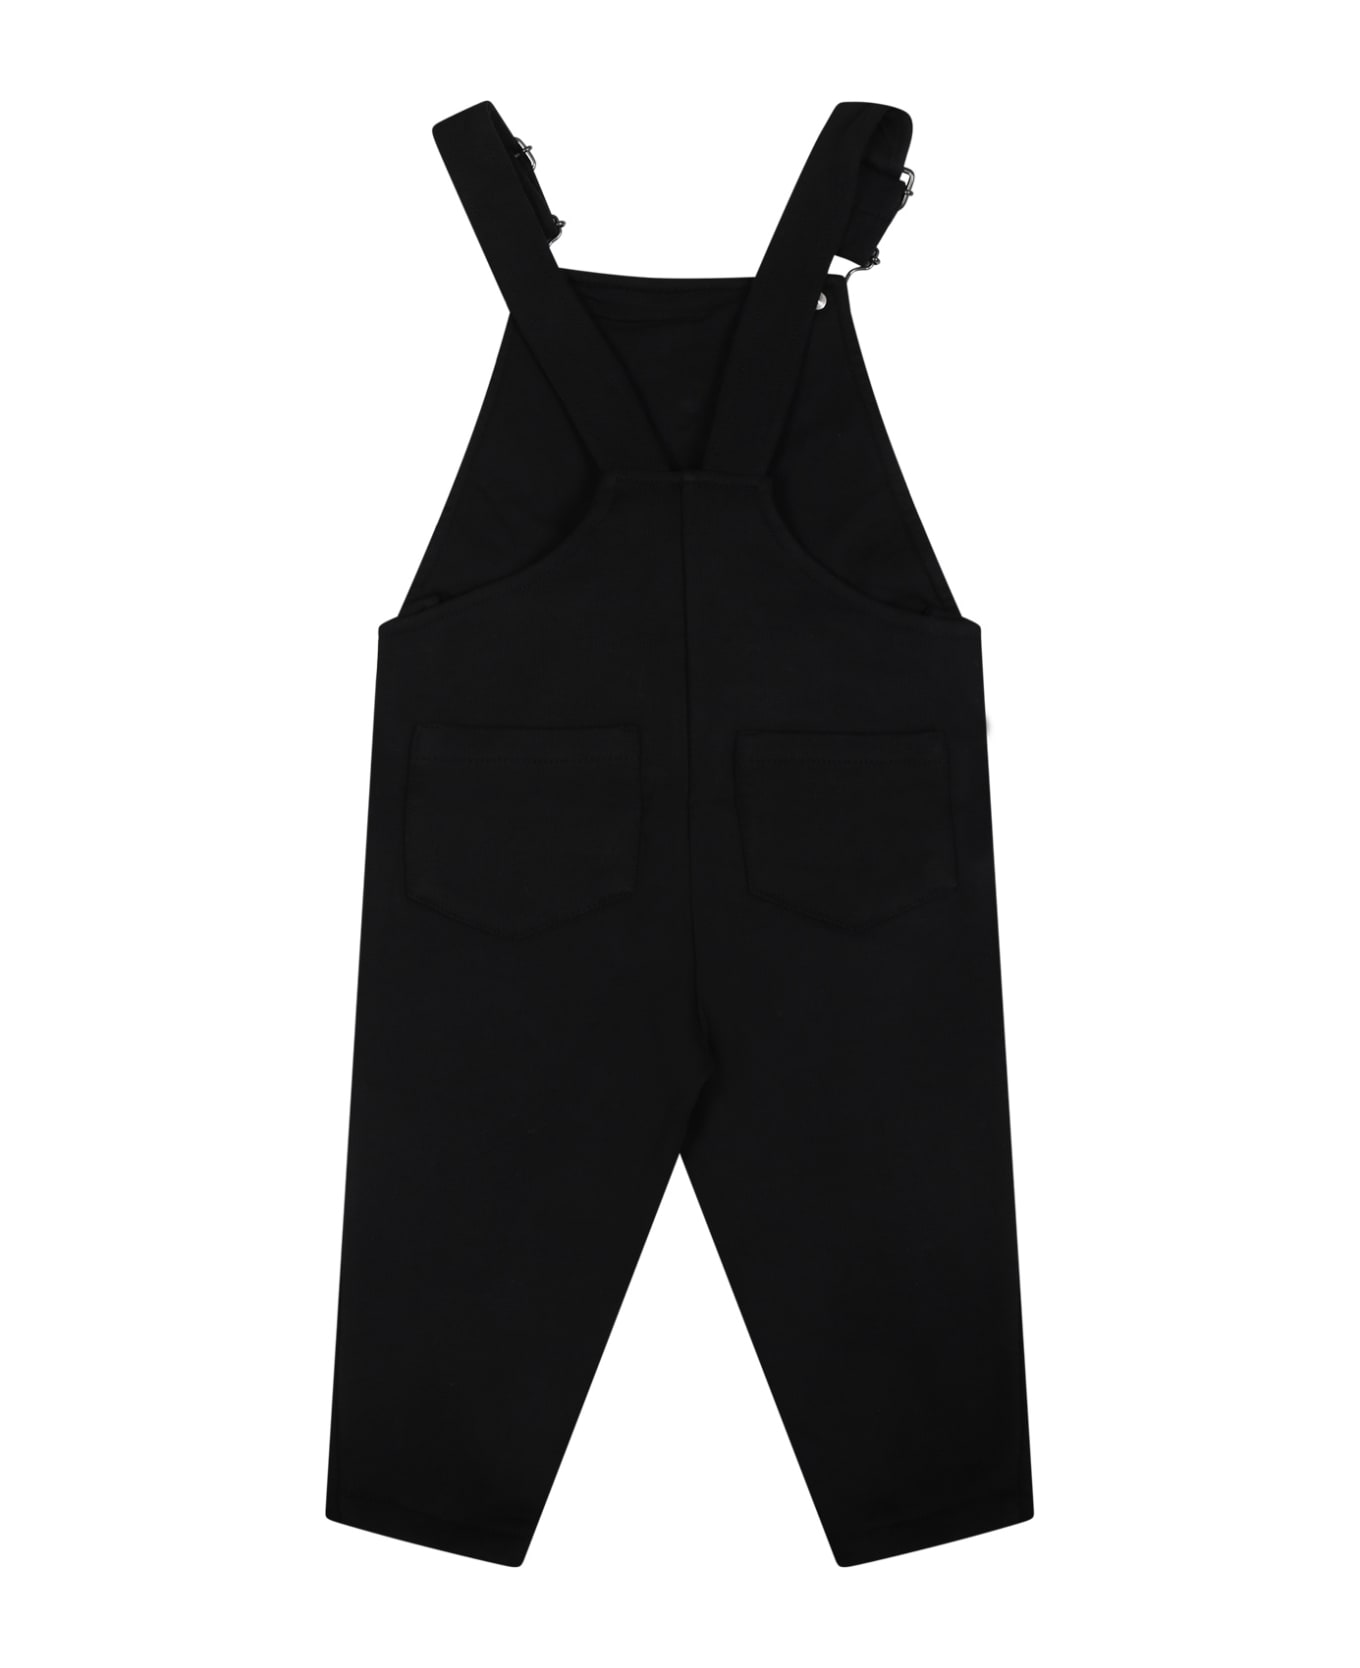 Stella McCartney Kids Black Dungarees For Baby Boy With Print - Black